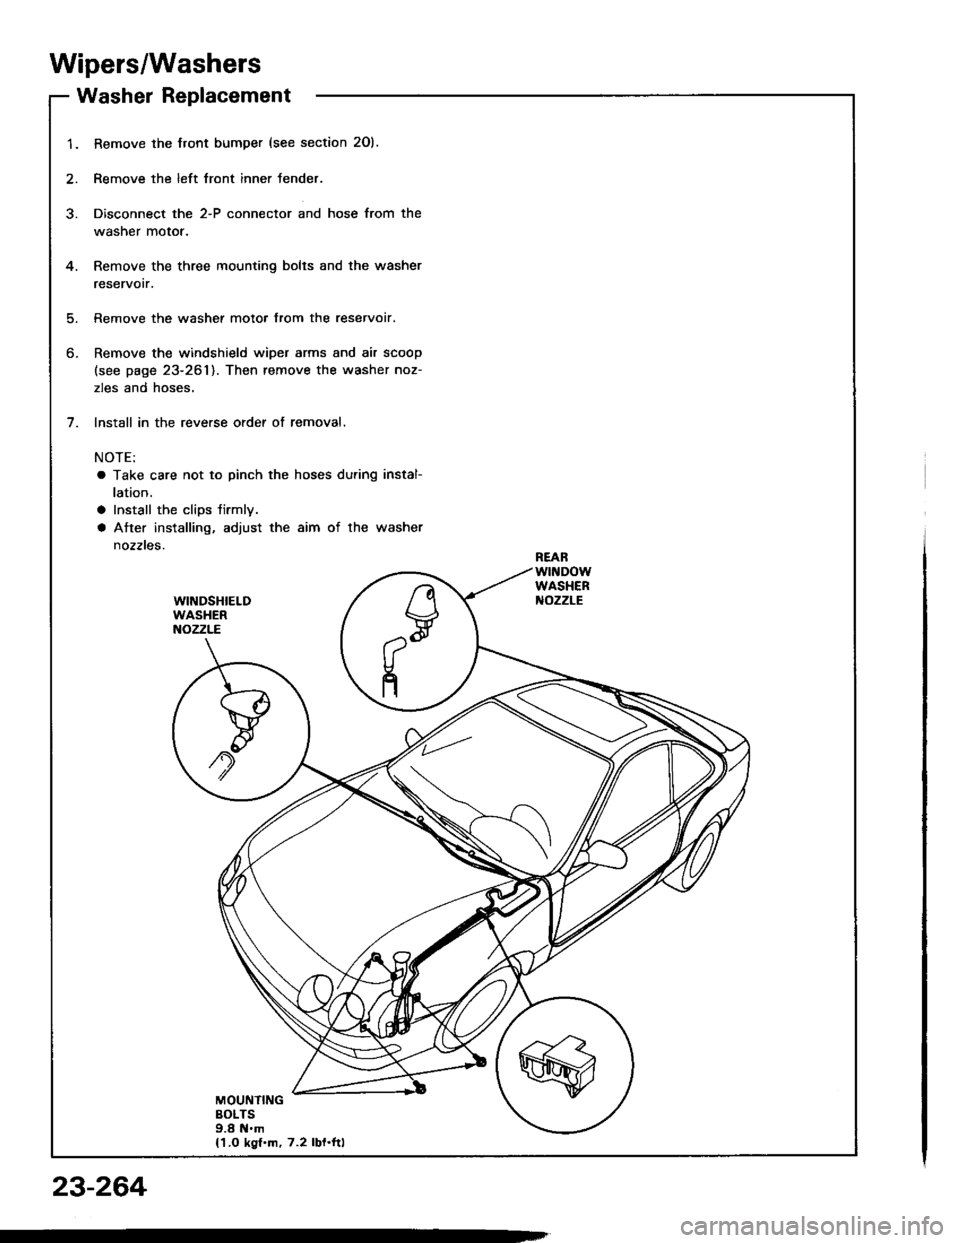 HONDA INTEGRA 1994 4.G Workshop Manual Wipers/Washers
Washer Replacement
1.
5.
6.
Bemove the Jront bumper (see section 2Ol.
Remove the left lront inner fender.
Disconnect the 2-P connector and hose from the
washer motor.
Remove the three m